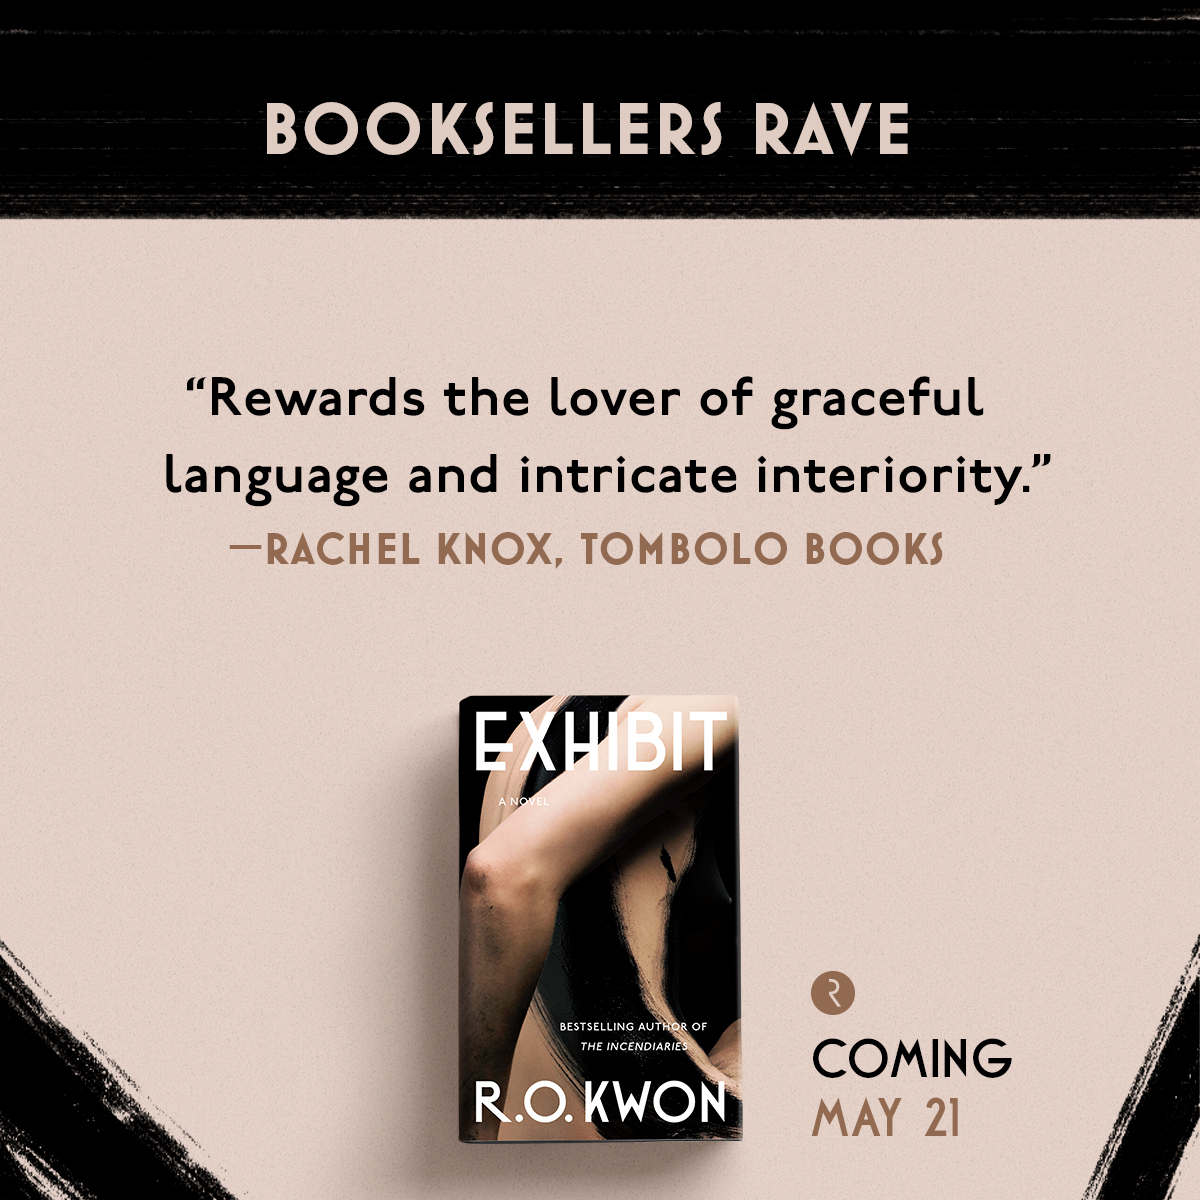 Are you ready for @rokwon's latest? 🫣 EXHIBIT hits shelves 5/21. See why booksellers like Rachel at @TomboloBooks are raving and pre-order your copy today: bit.ly/3ZFXXom